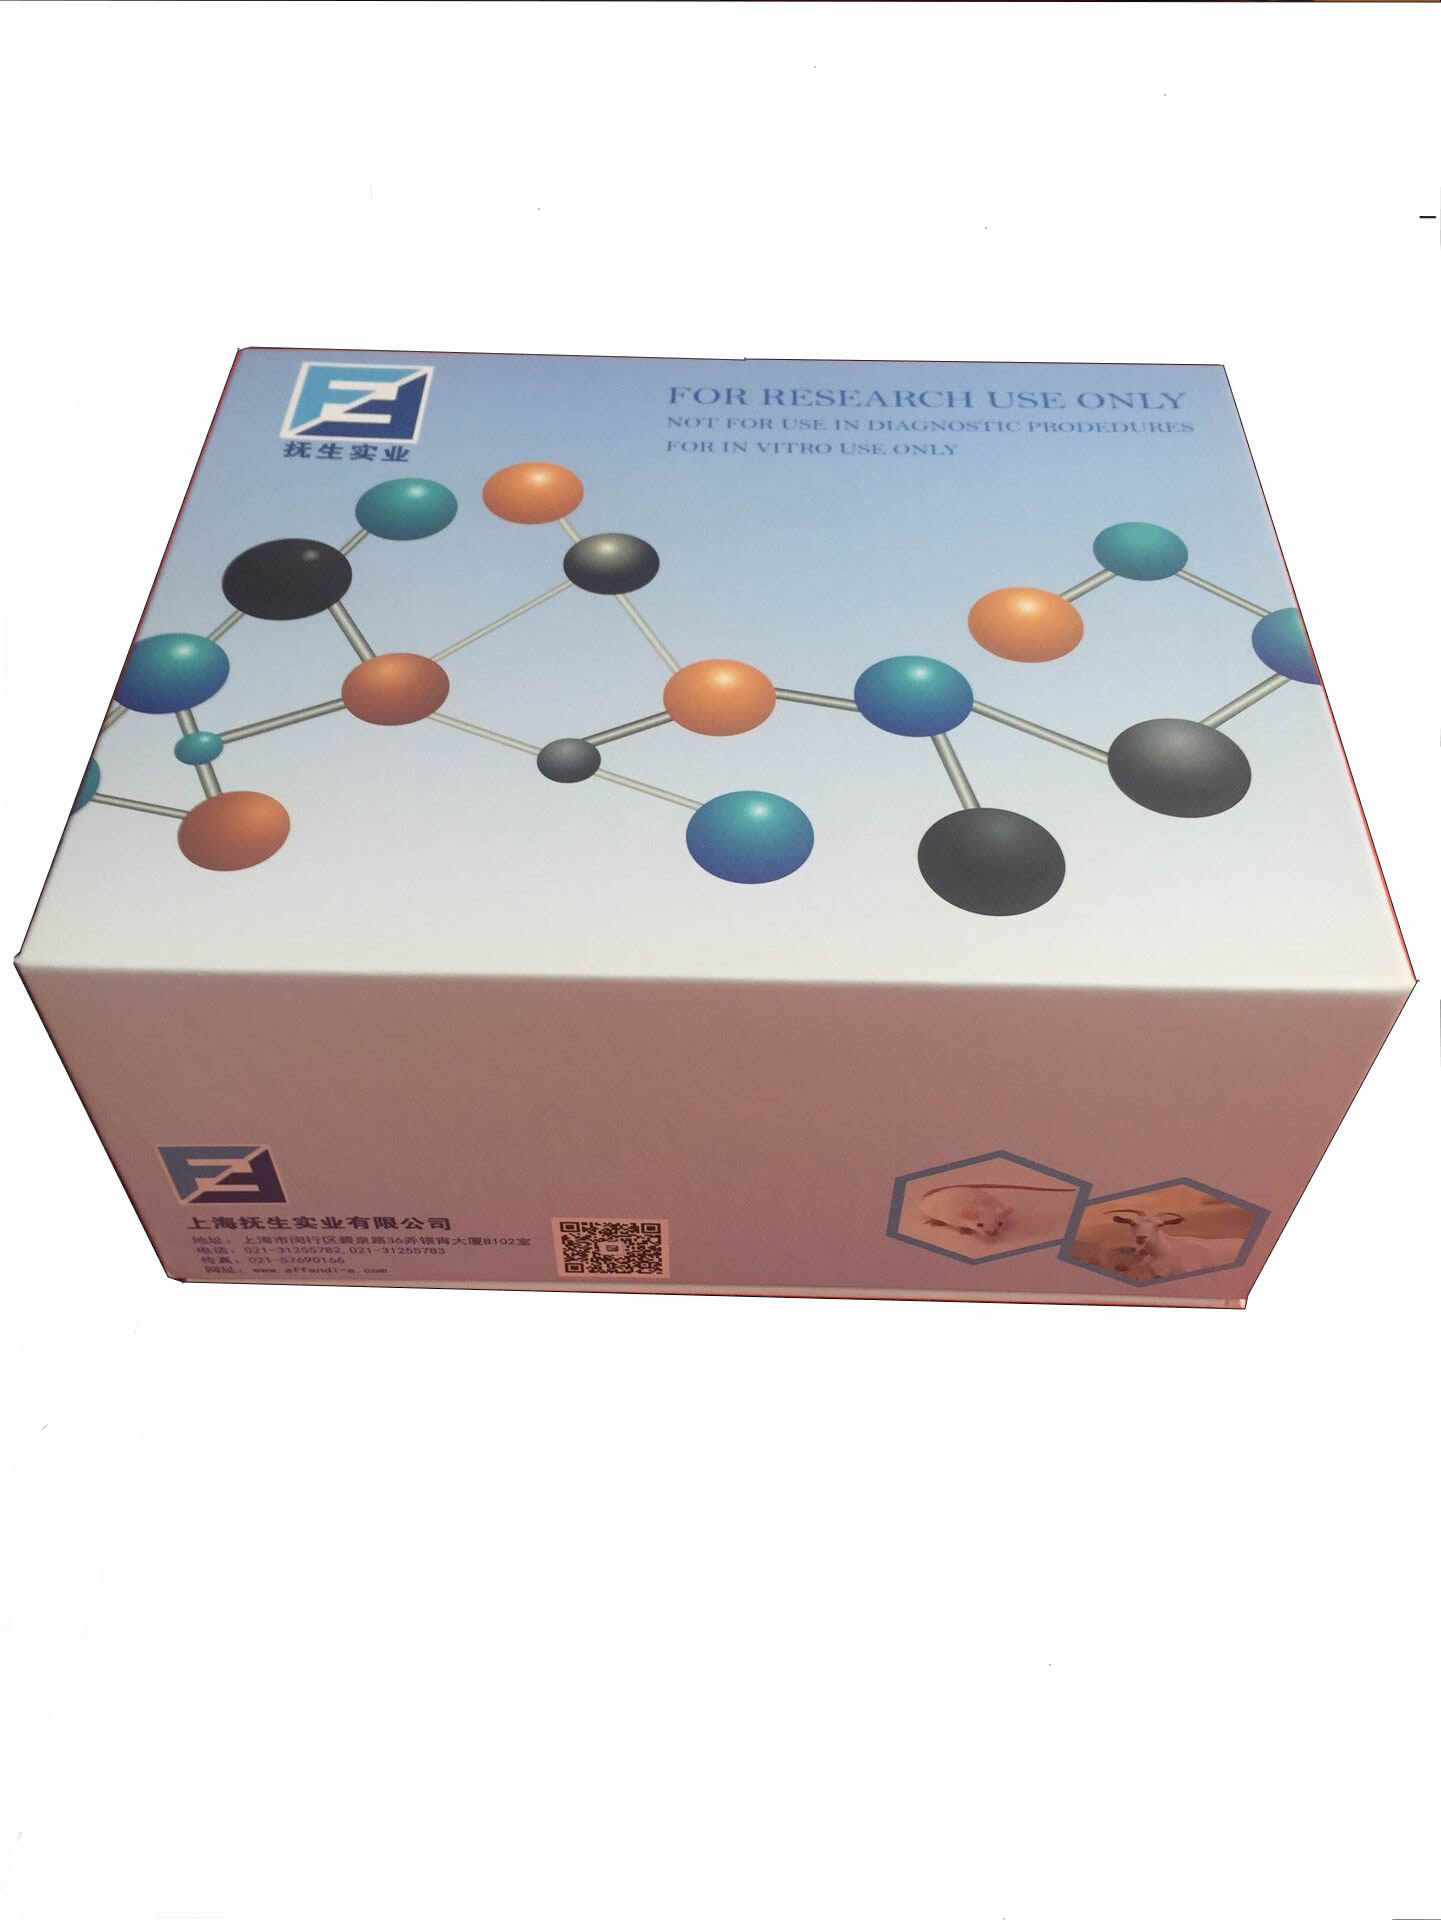 FOR Liver-expressed antimicrobial peptide 2 ELISA Kit,Liver-expressed antimicrobial peptide 2 ELISA Kit